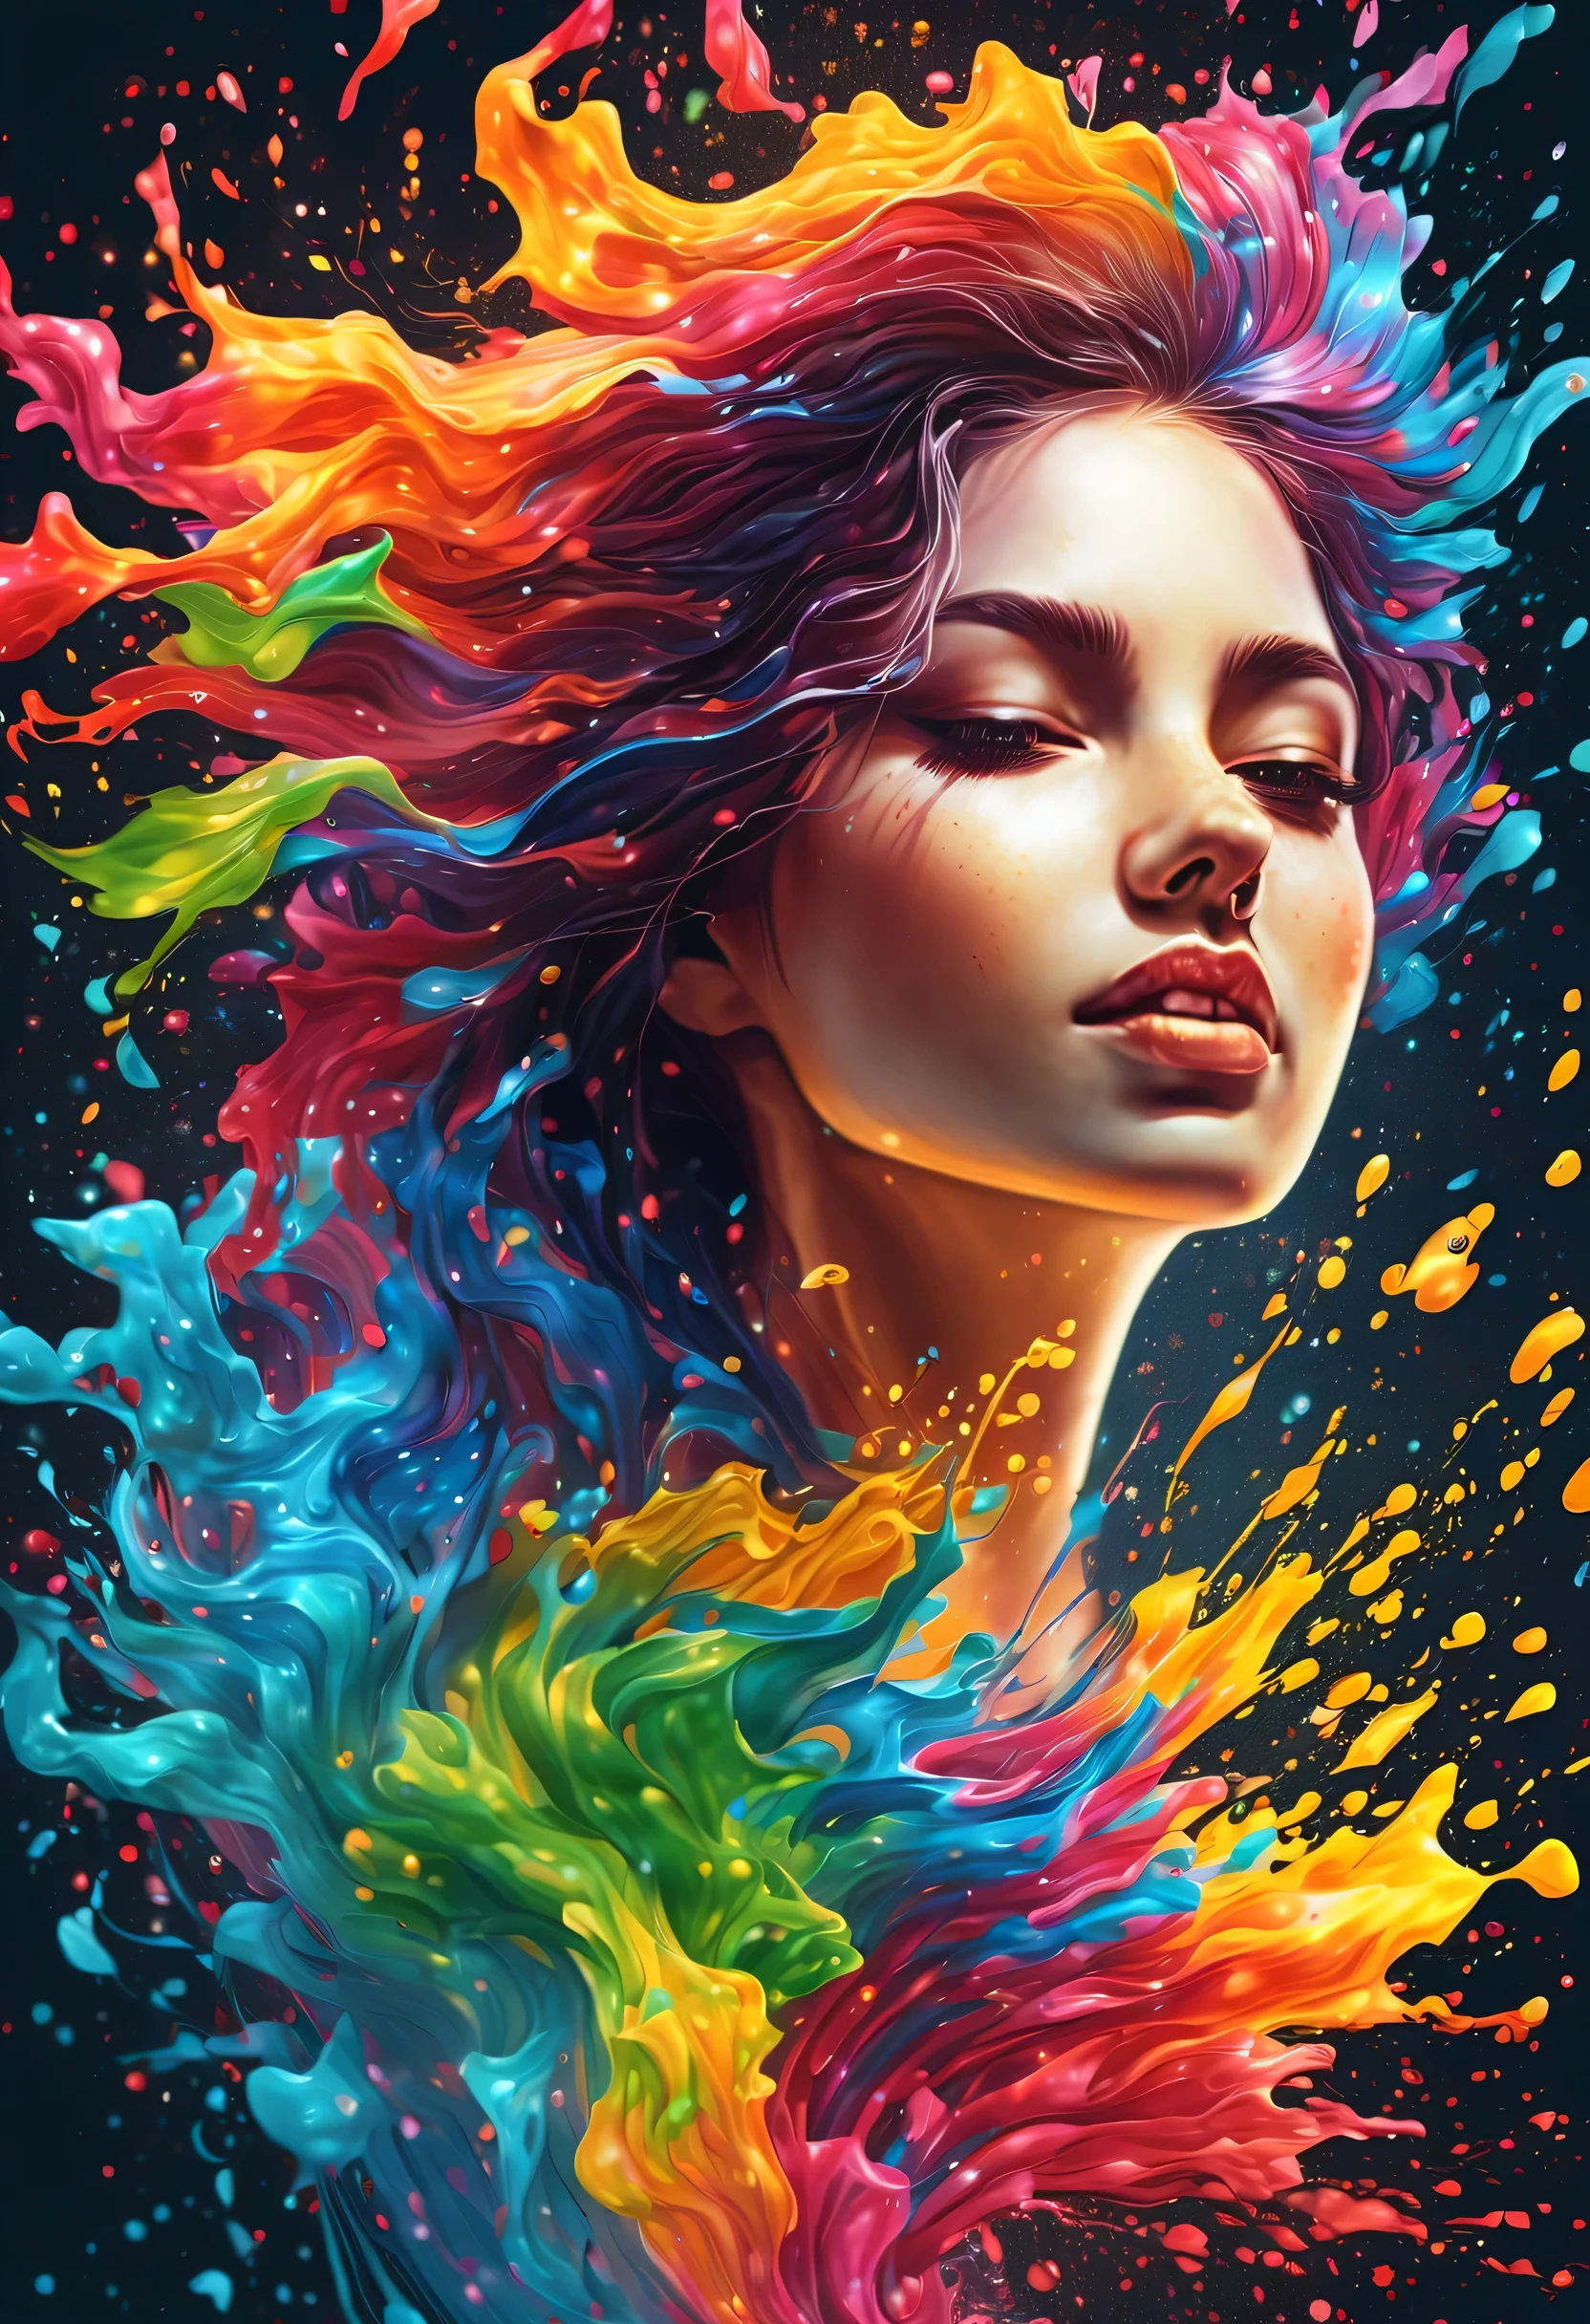 Expressing the flow of ink dancing in the wind,water effects,colorful water,goddess:govern the arts:Manipulating water:rich hair:sleeoing:perfect face:beautiful:17 years old:healthy,Ink splash,Sparkling,Bright colors,light reflection,rich colors,abstract,3D,8K,High resolution,masterpiece,high quality,Detailed details,Colors of the rainbow,laugh mischievously,tricky,design,fun,bright colors,splash of water,invite you to the world of art,black background